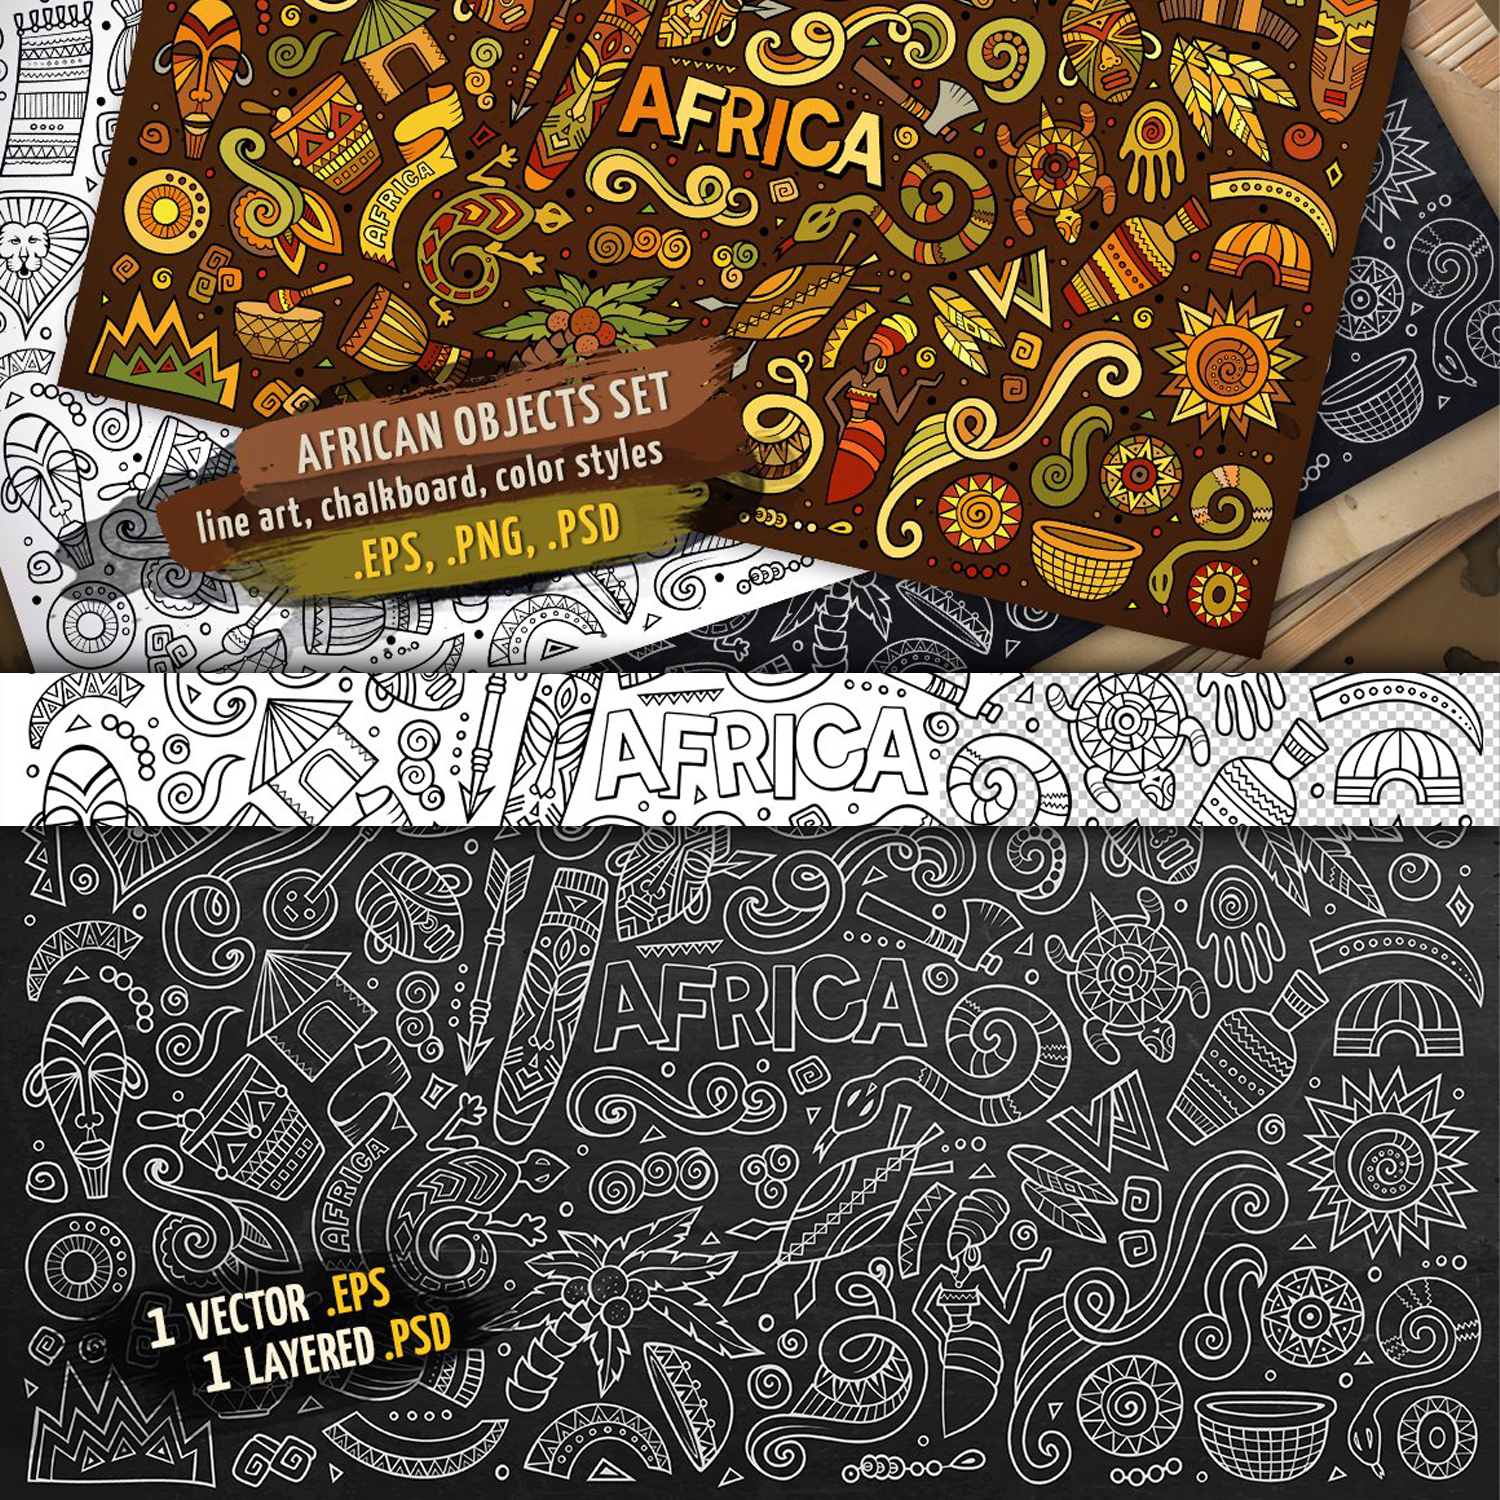 Preview images of African attributes.